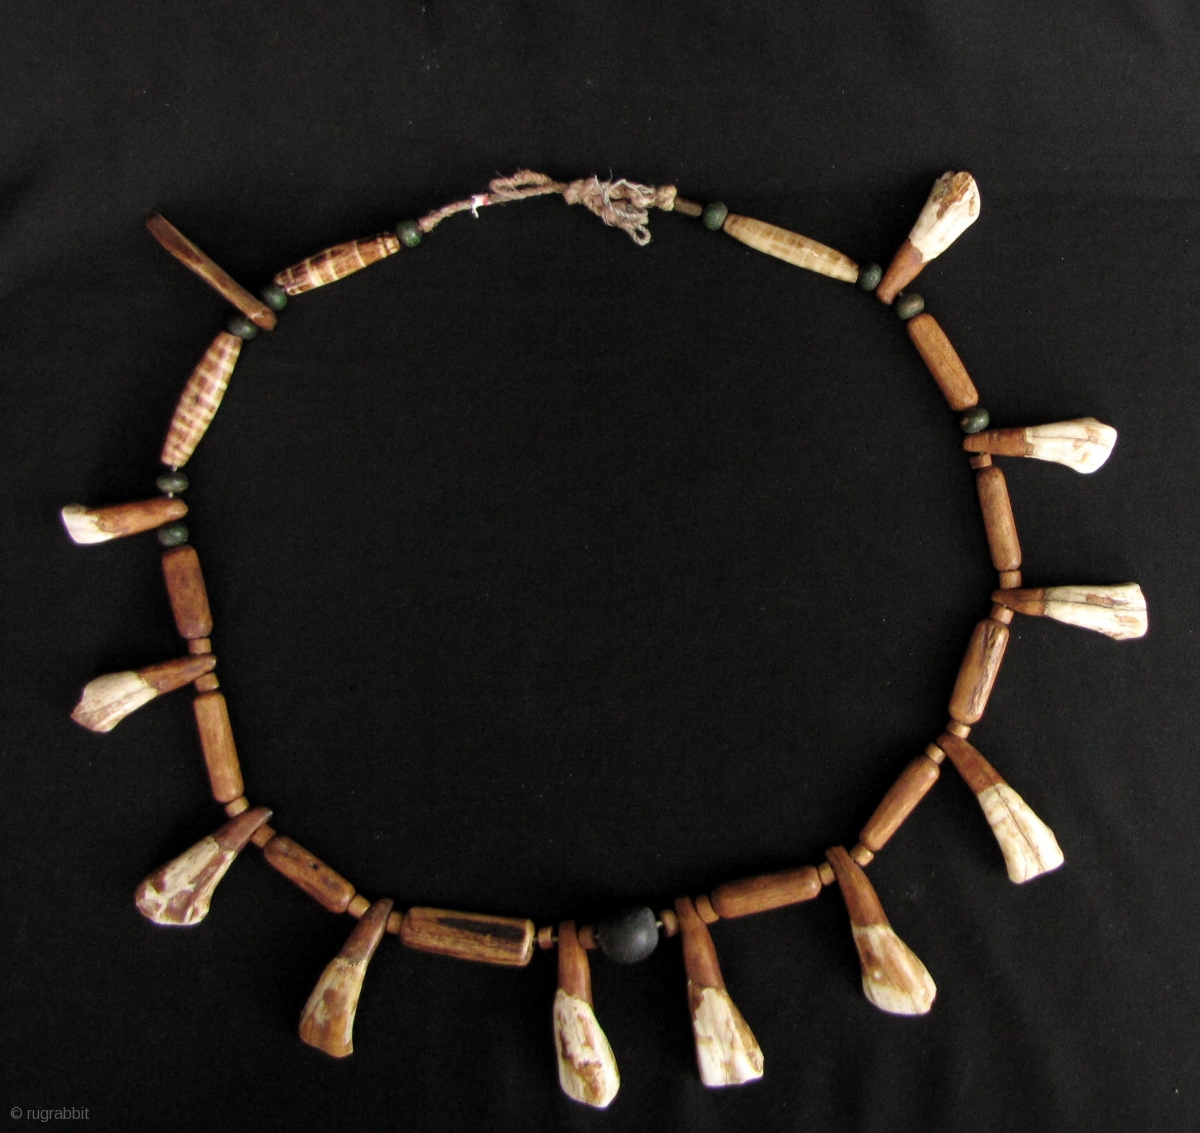 Chin Animal Bone Necklace: Eclectic strand of spherical wood